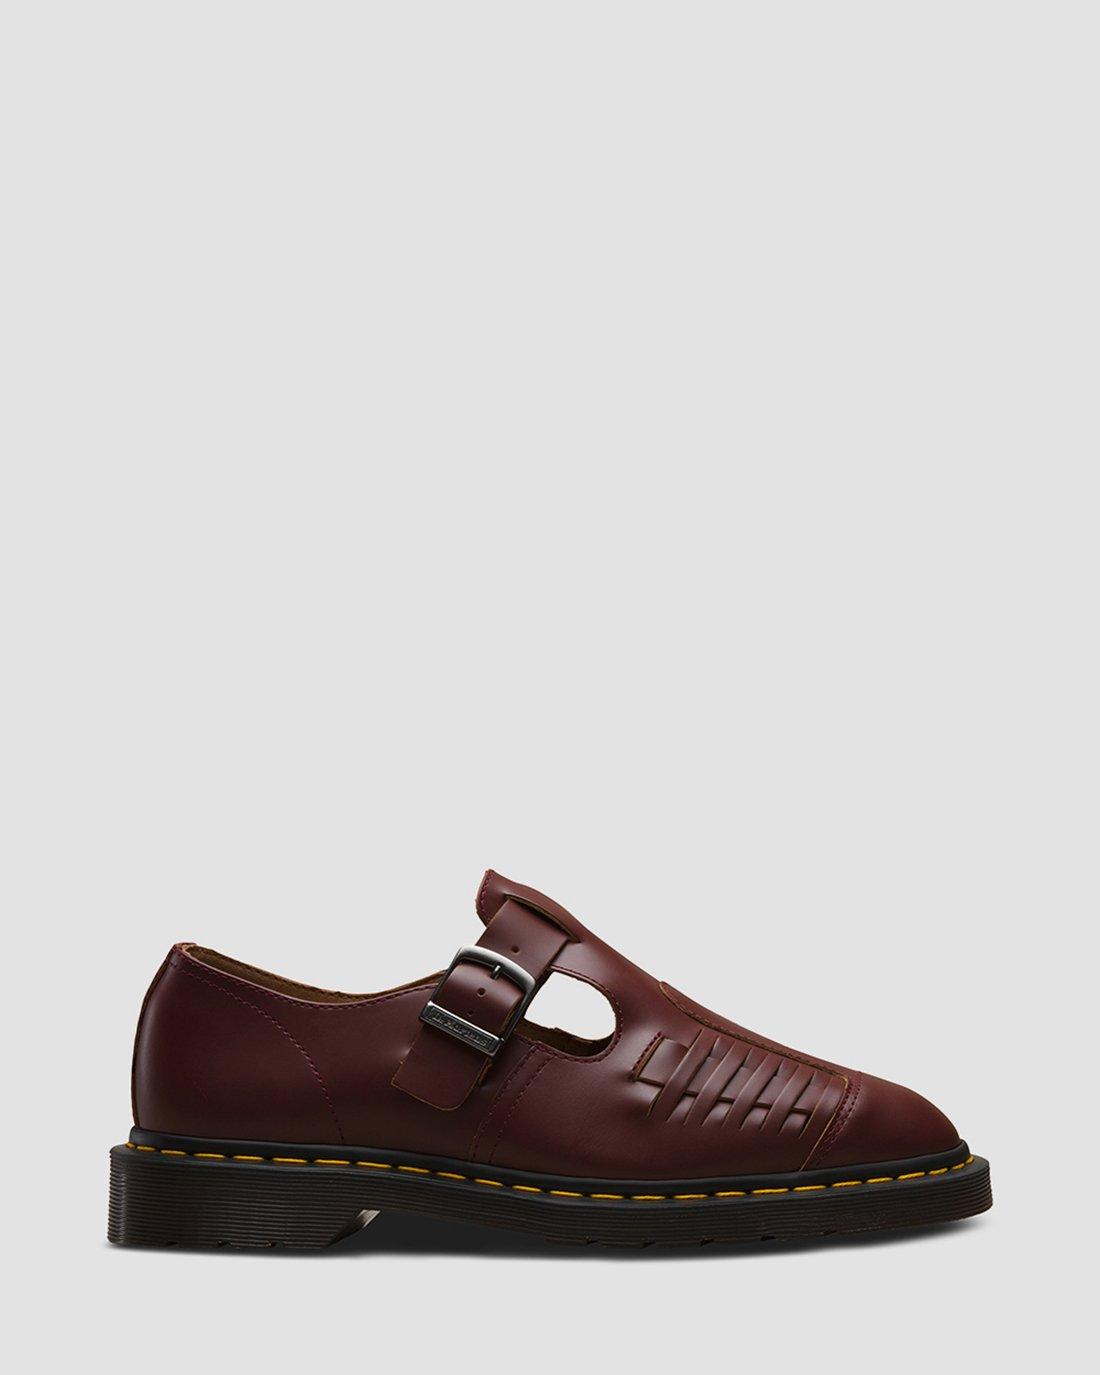 MICA ARCHIVE in Oxblood | Dr. Martens